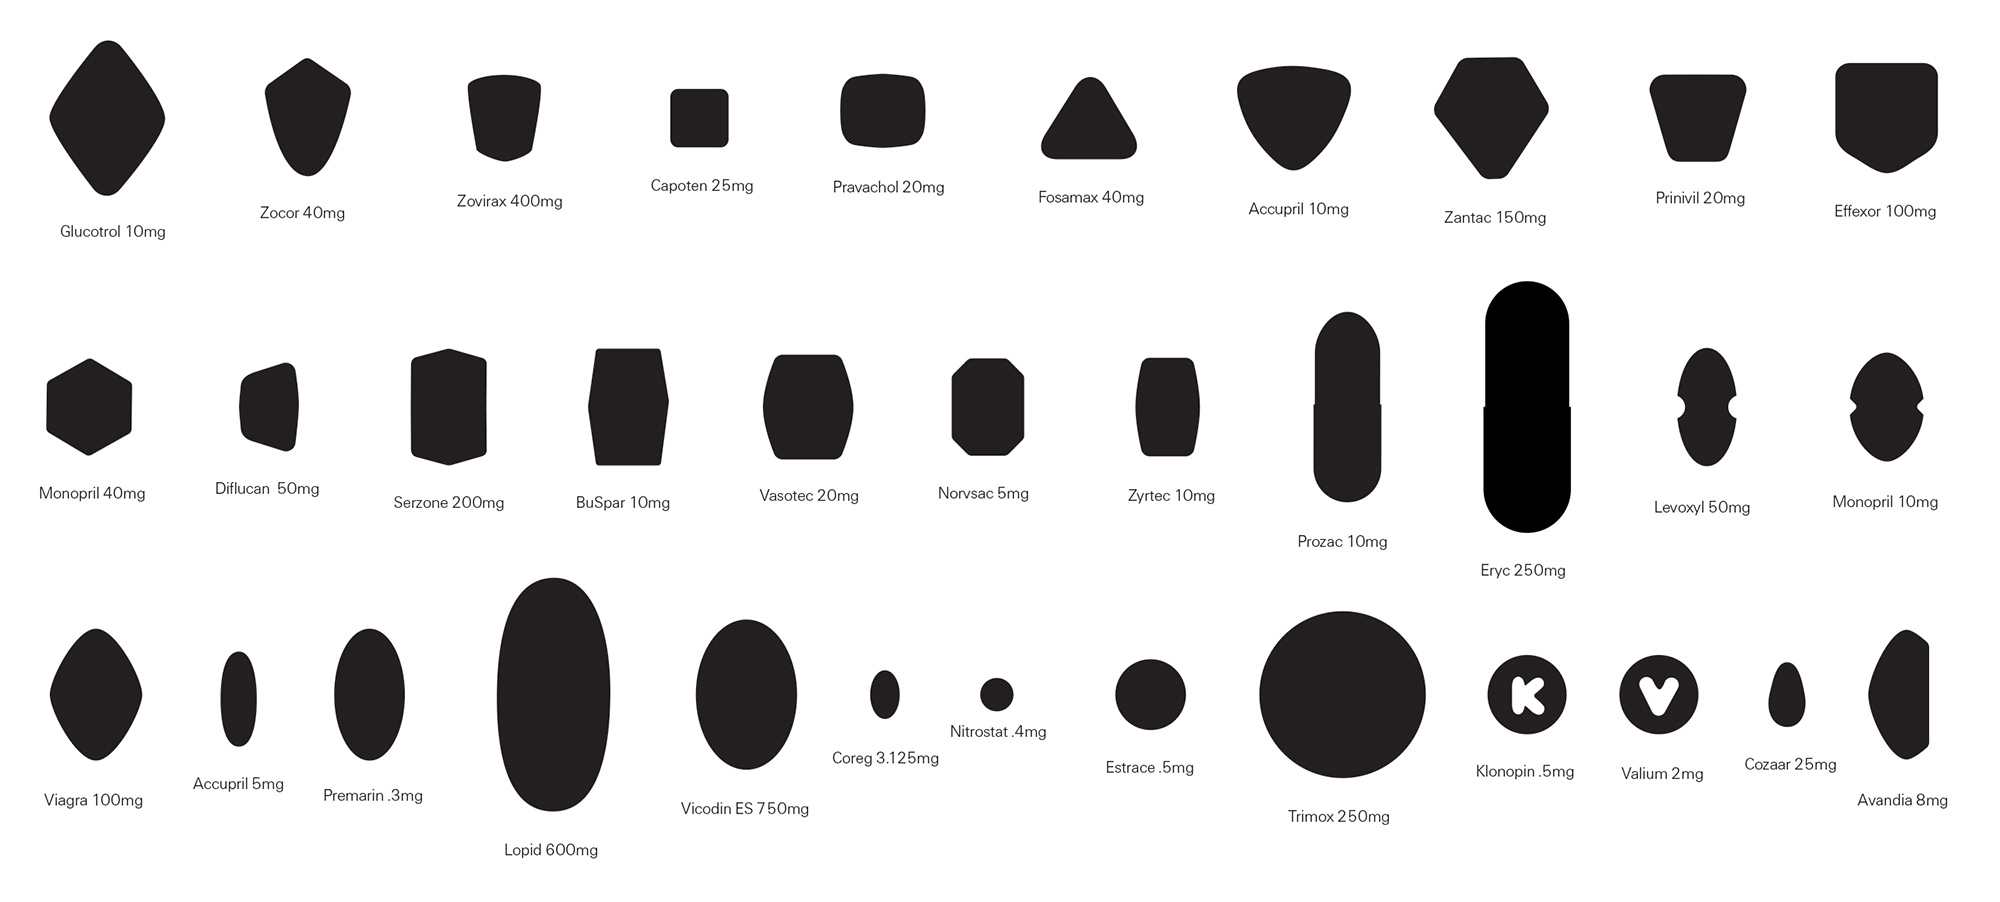 A diagram featuring the silhouettes of thirty-four different pharmaceutical tablets.